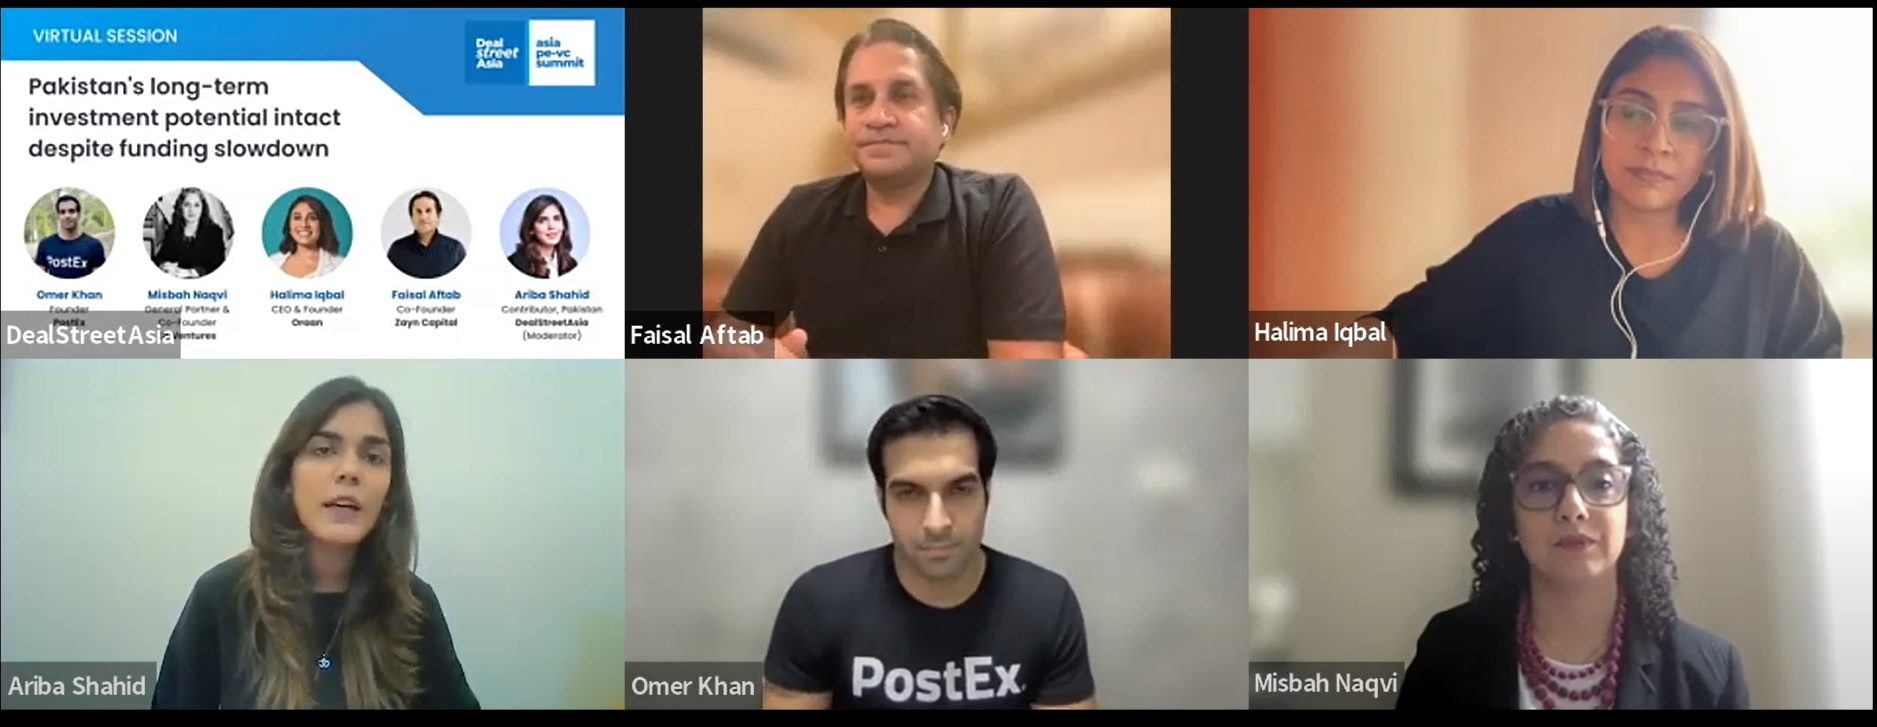 Summit Video: Experts discuss Pakistan’s long-term investment potential